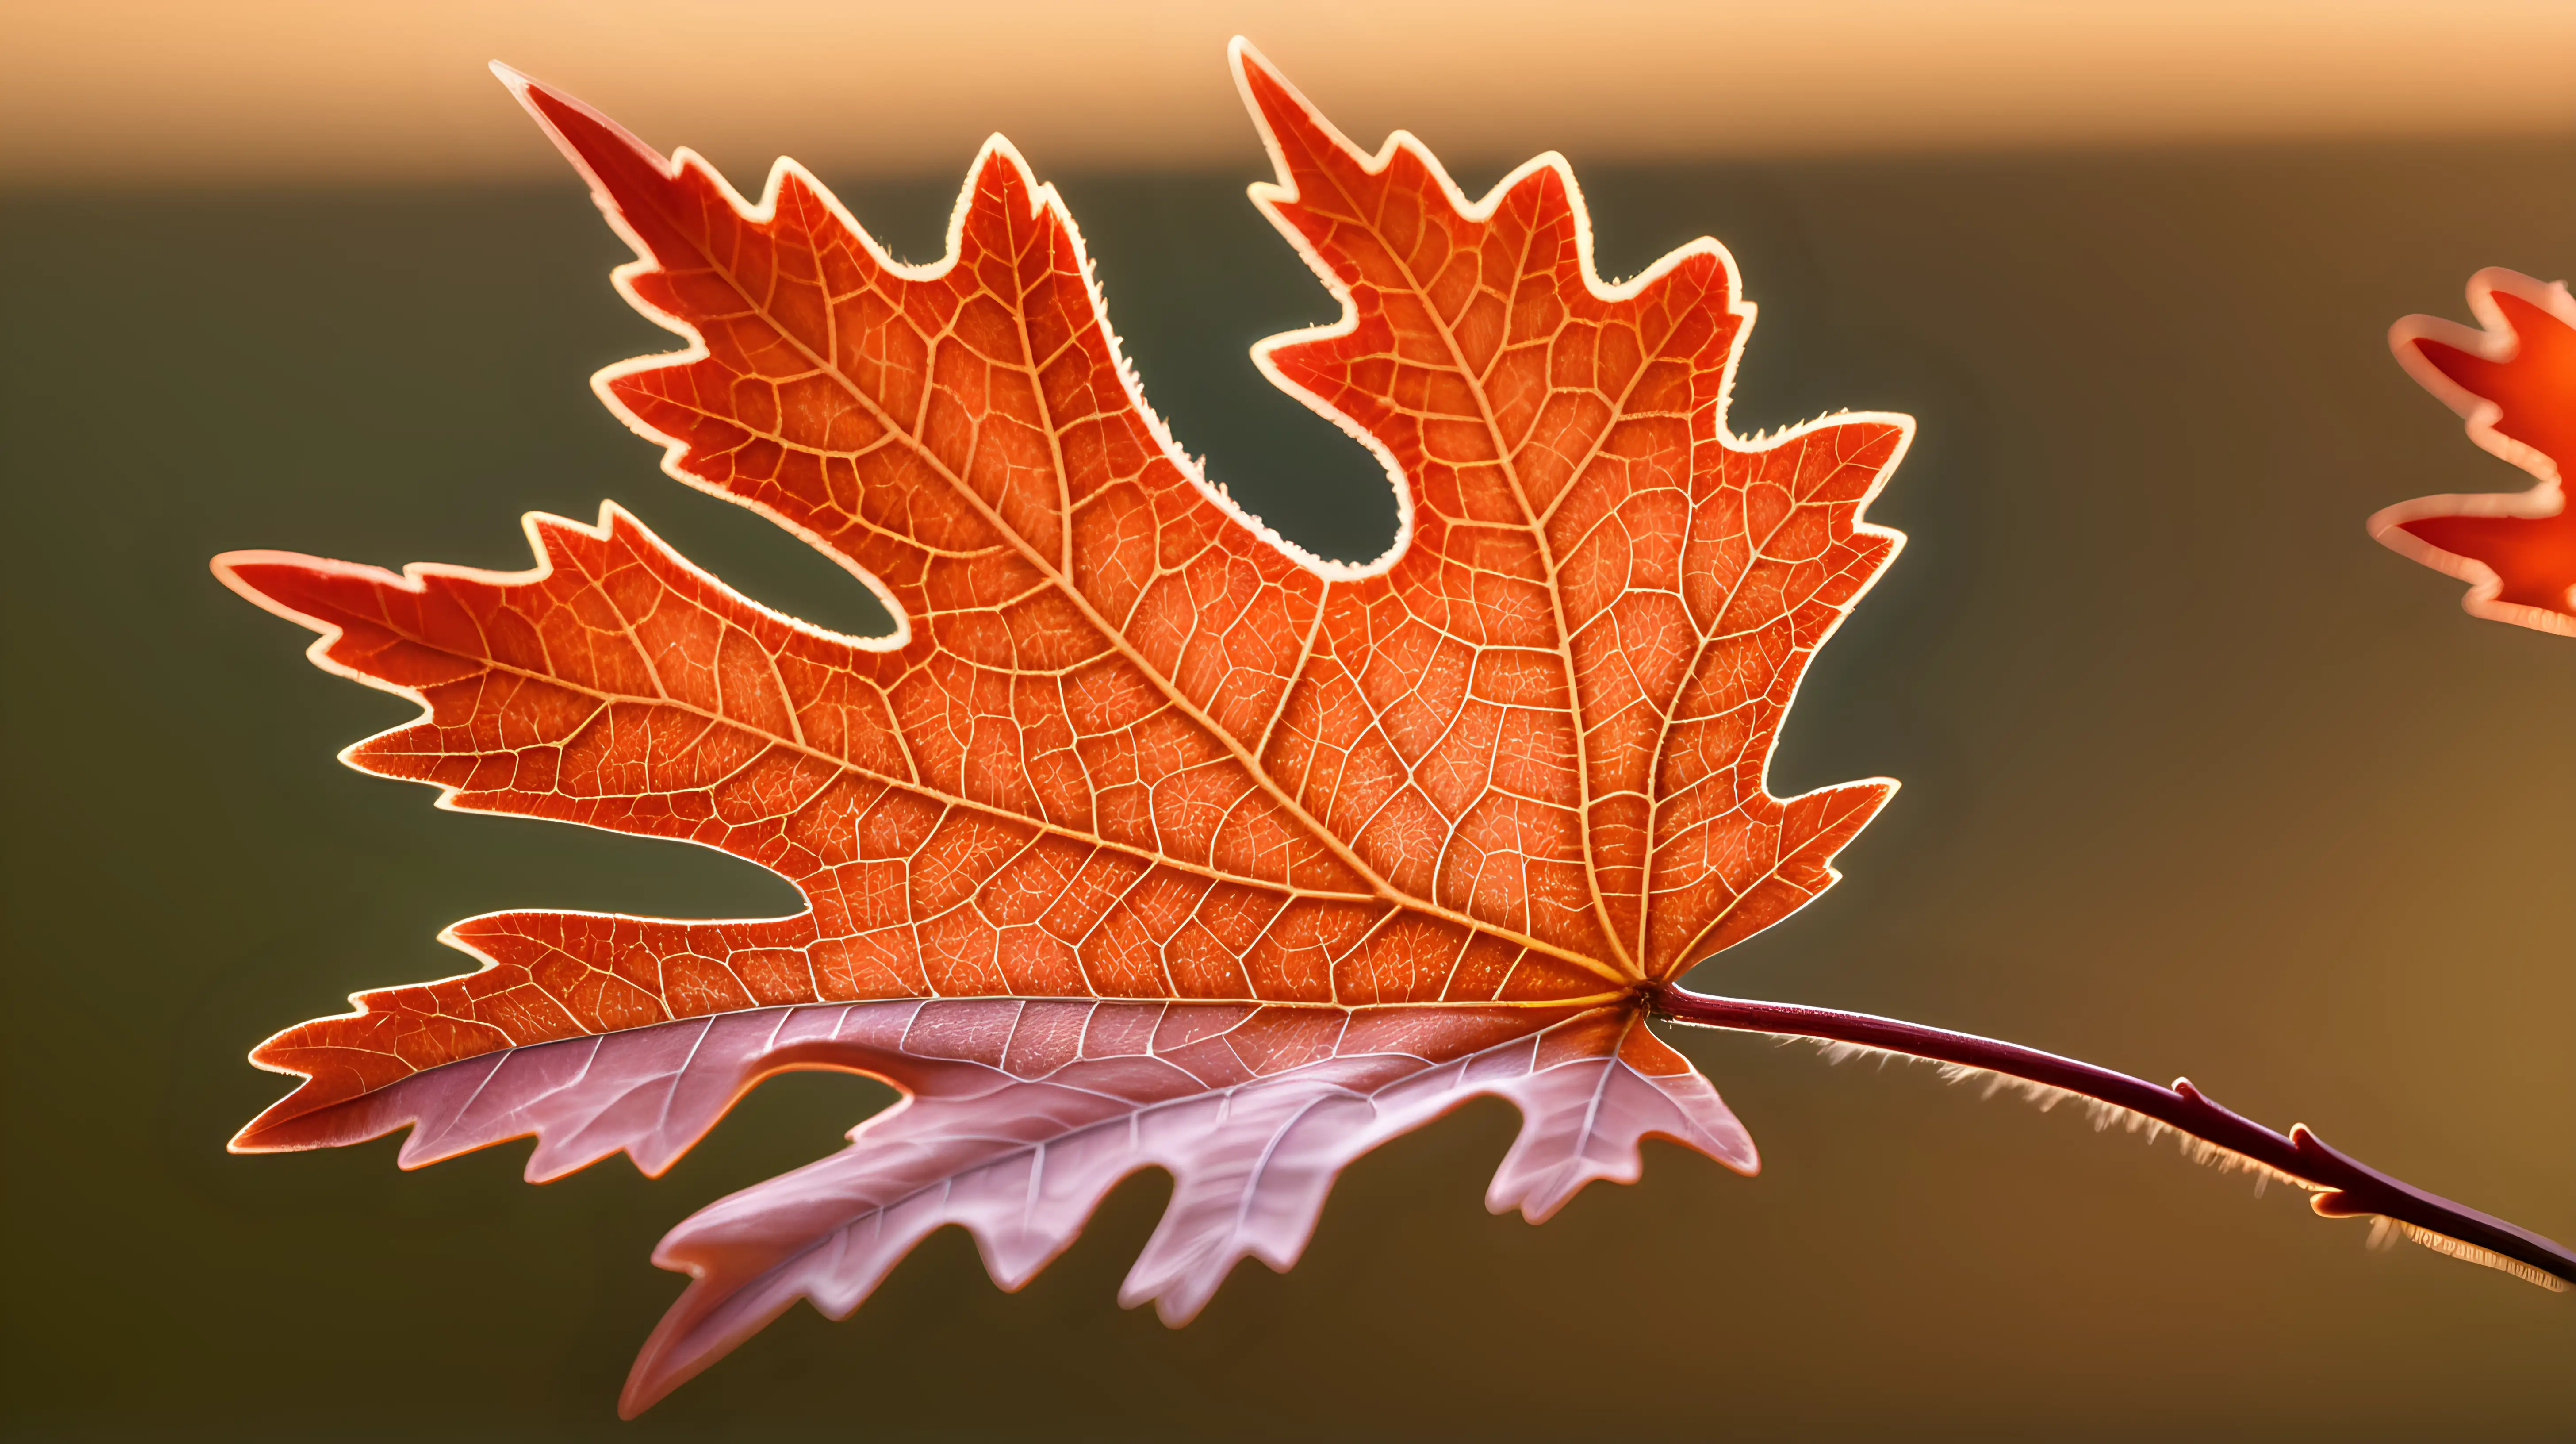 A macro photograph capturing the intricate details of a single red oak leaf, illuminated by the soft glow of the setting sun.